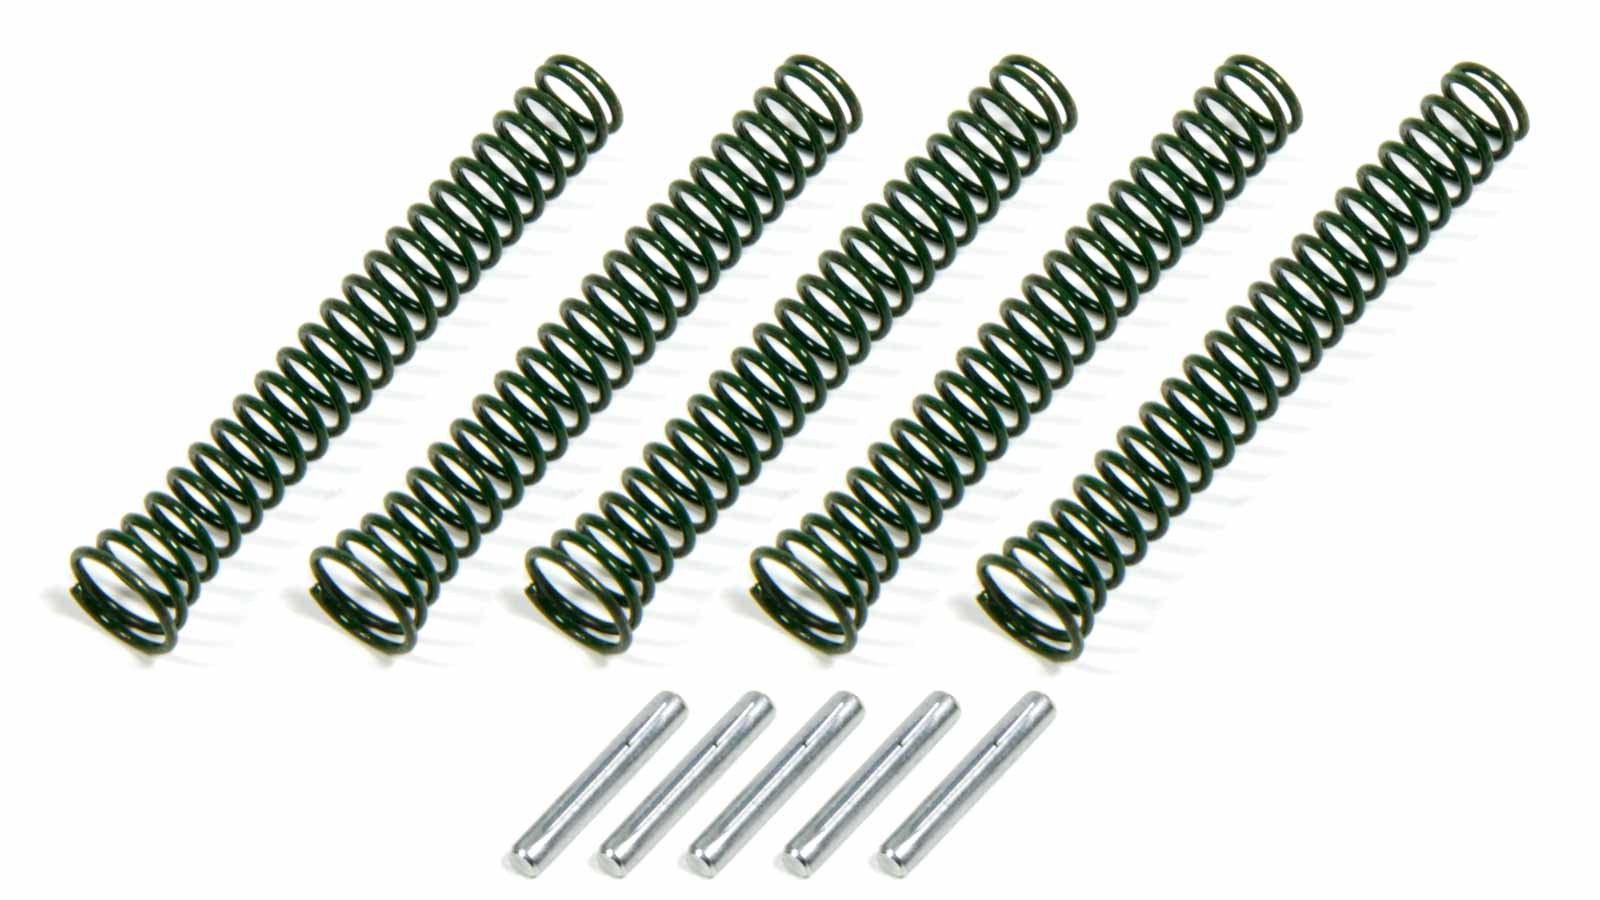 Melling Performance 55049 Oil Pump Relief Spring, High Pressure, 49 psi, Steel, Green, Small Block Chevy, Set of 5